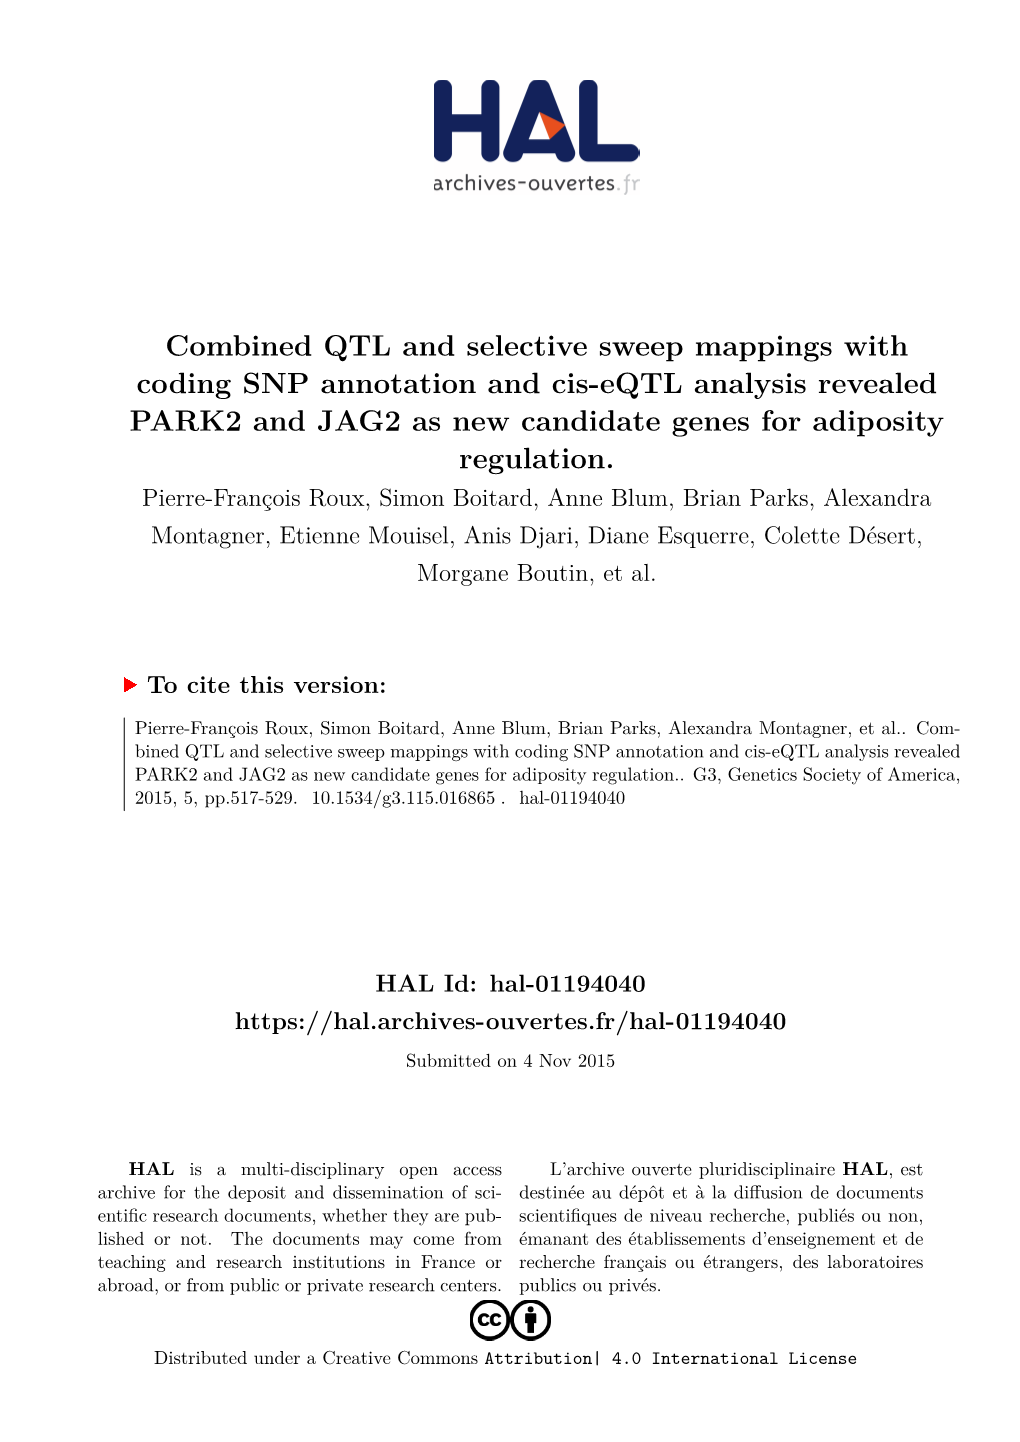 Combined QTL and Selective Sweep Mappings with Coding SNP Annotation and Cis-Eqtl Analysis Revealed PARK2 and JAG2 As New Candidate Genes for Adiposity Regulation